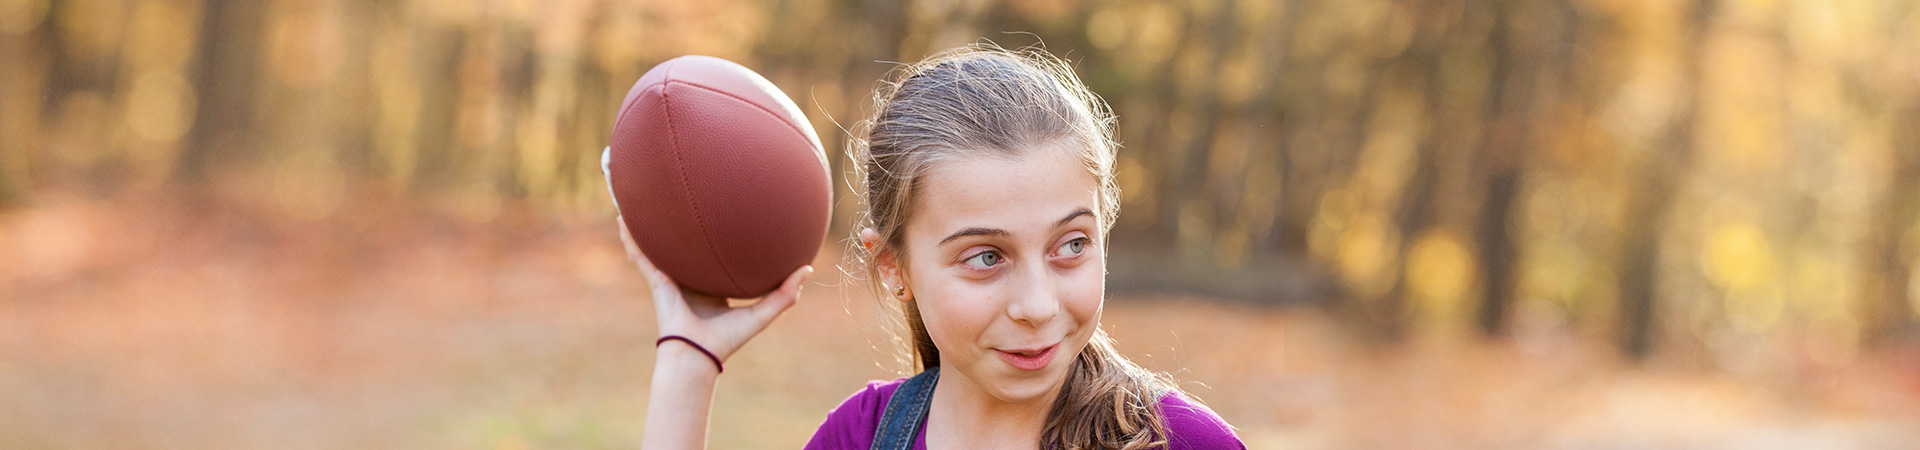  Girl Scout throwing a football outside in the fall 